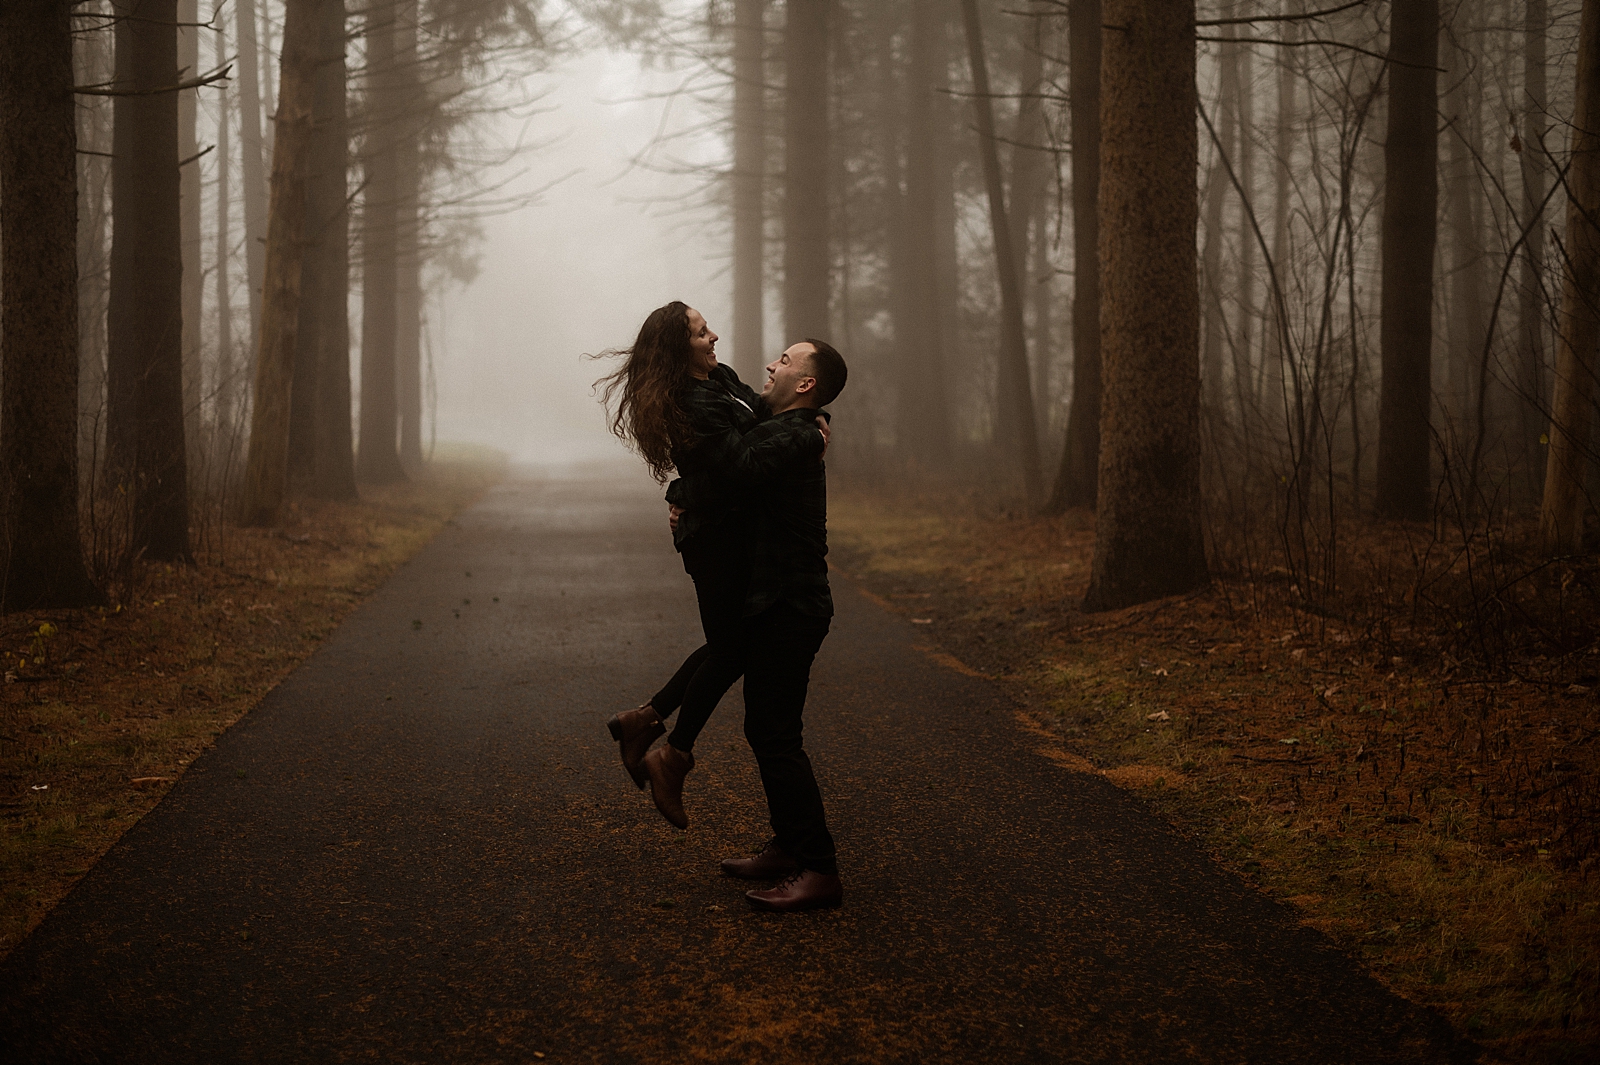 Man holding woman up in dark misty forest